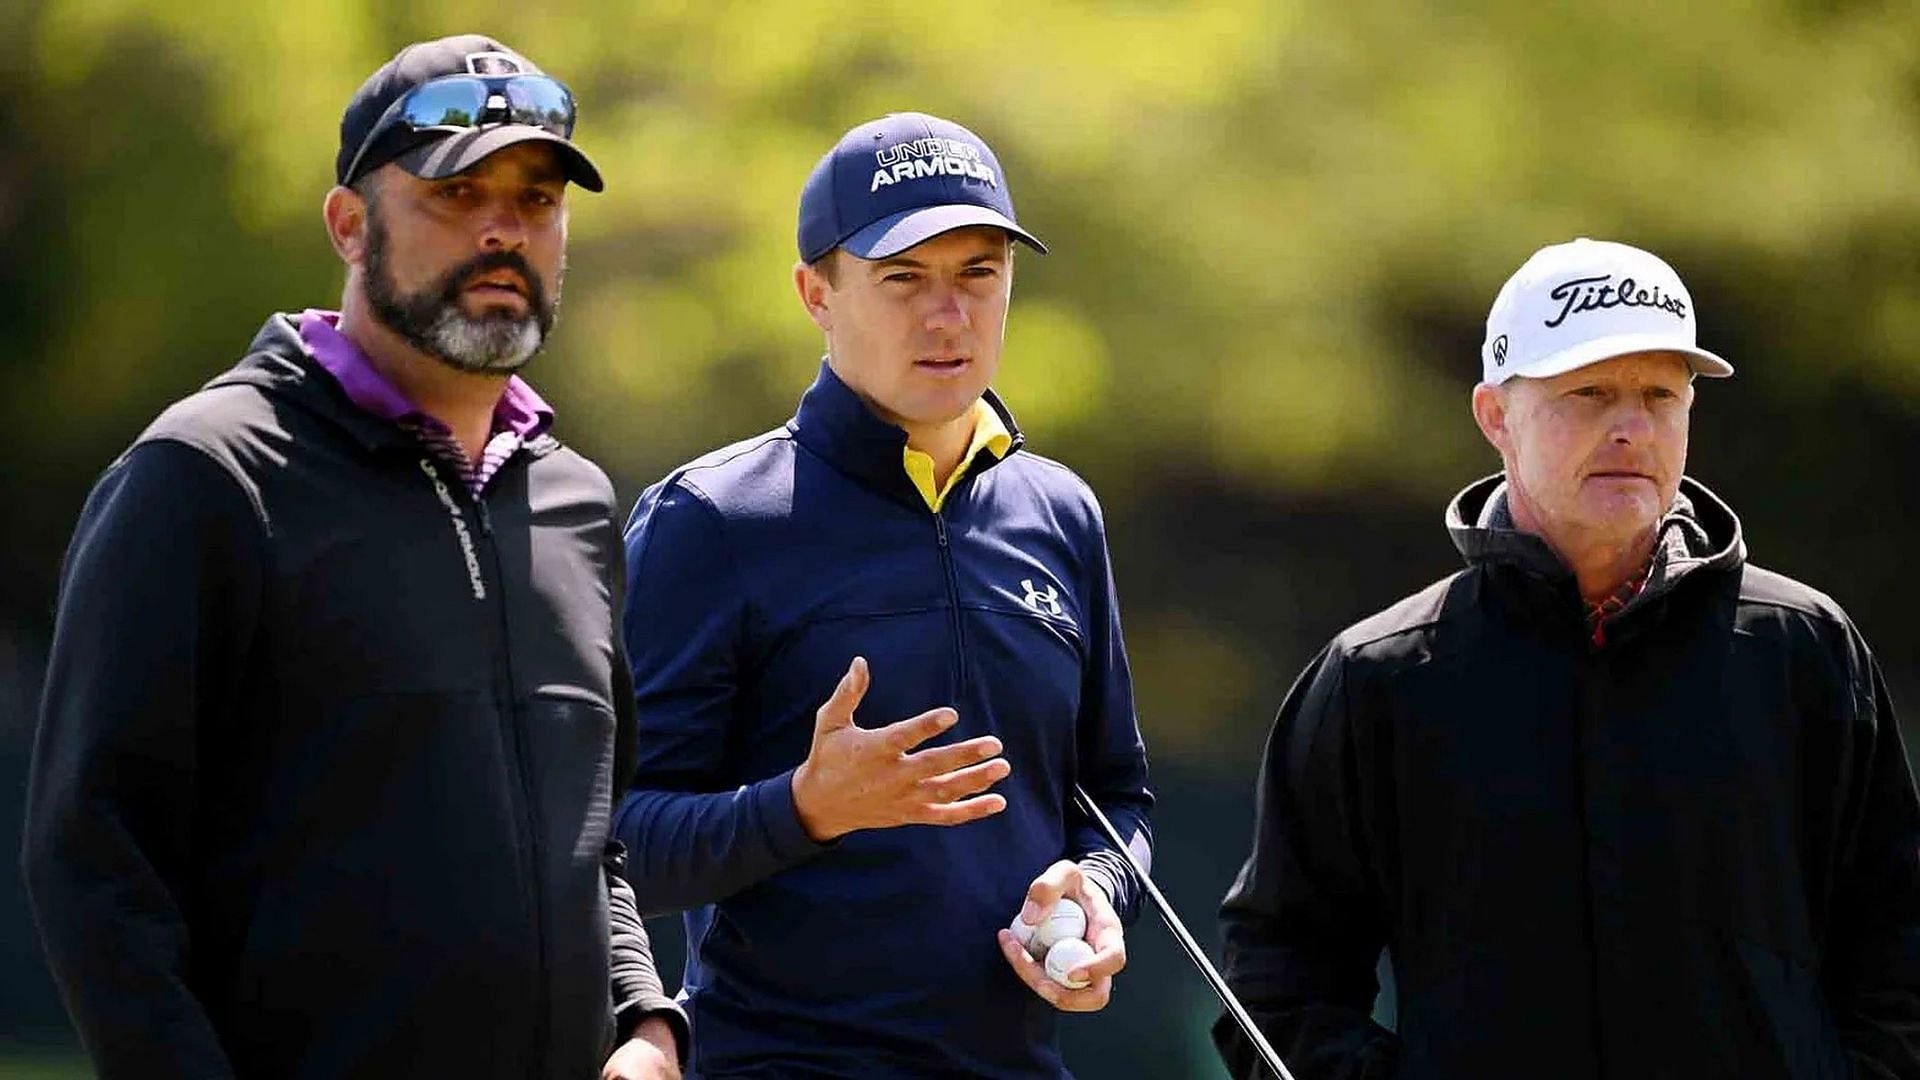 Jordan Spieth, center; his caddie, Michael Greller, left; and his coach, Cameron McCormick, in May.